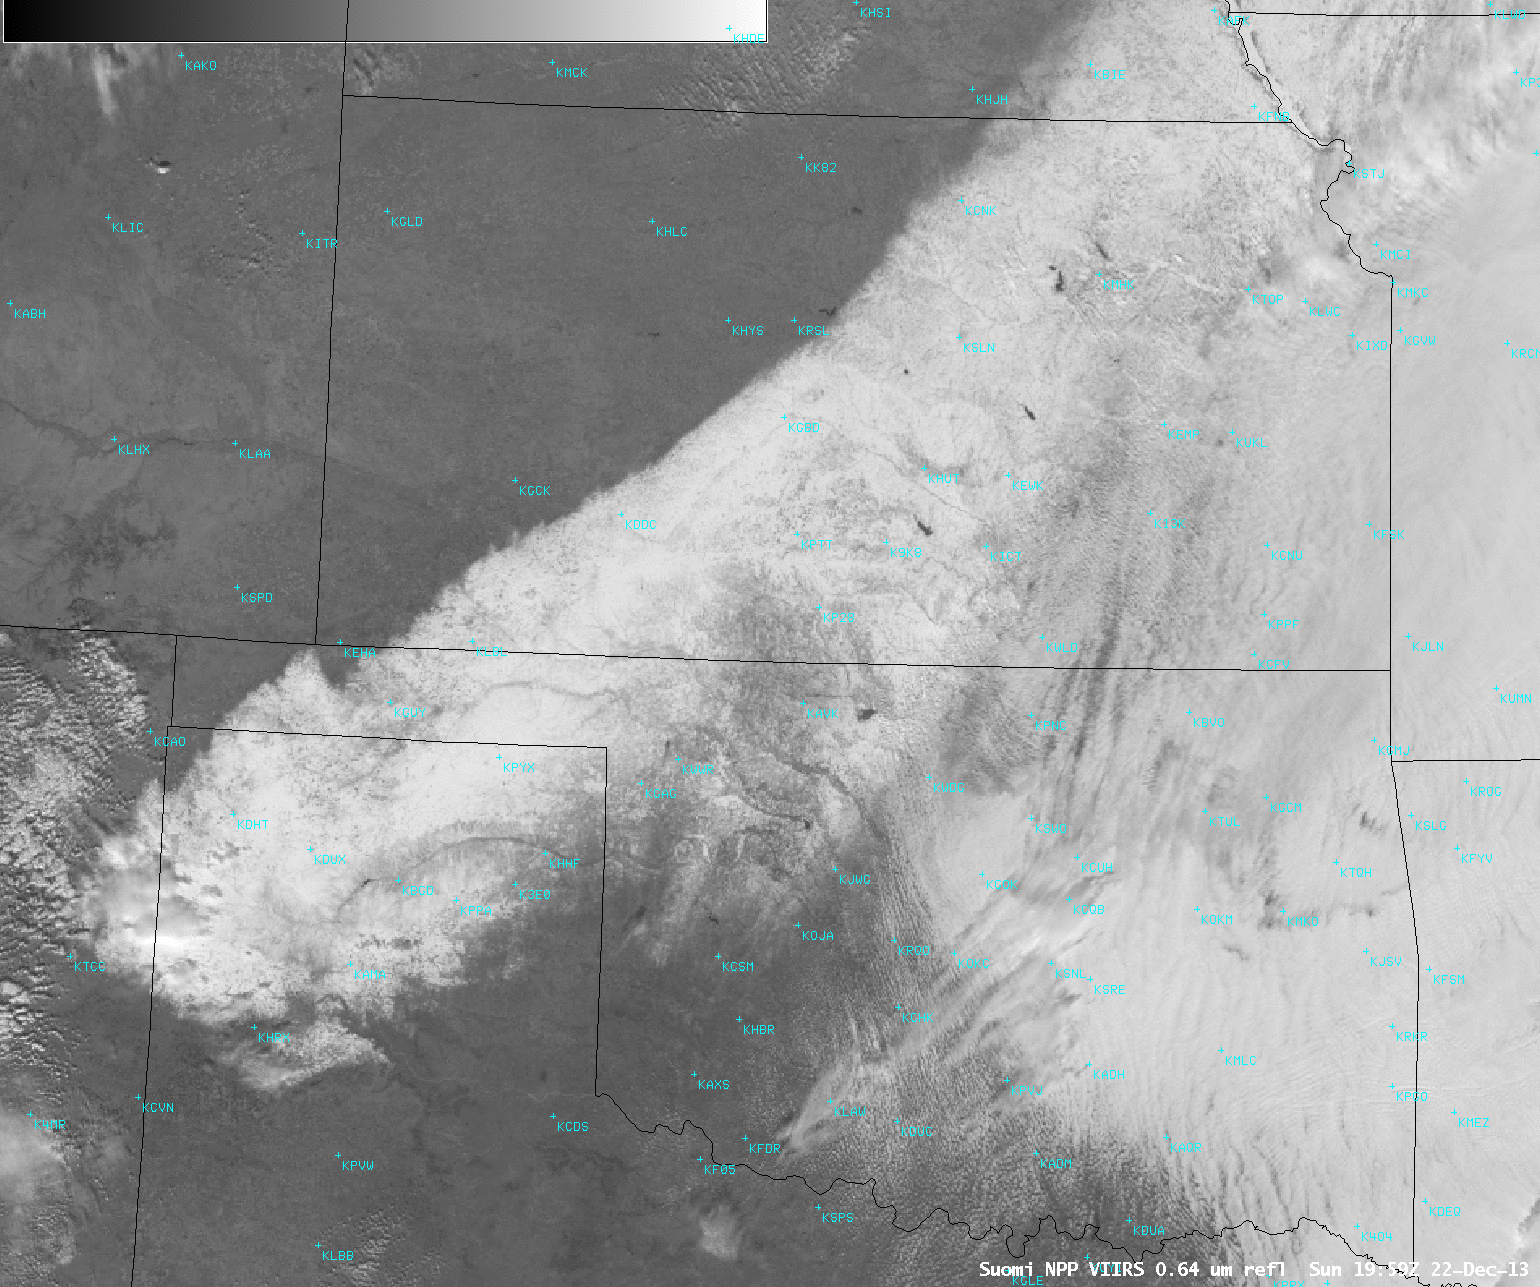 Suomi NPP VIIRS 0.64 µm visible channel and false-color snow/ice-vs-cloud RGB images